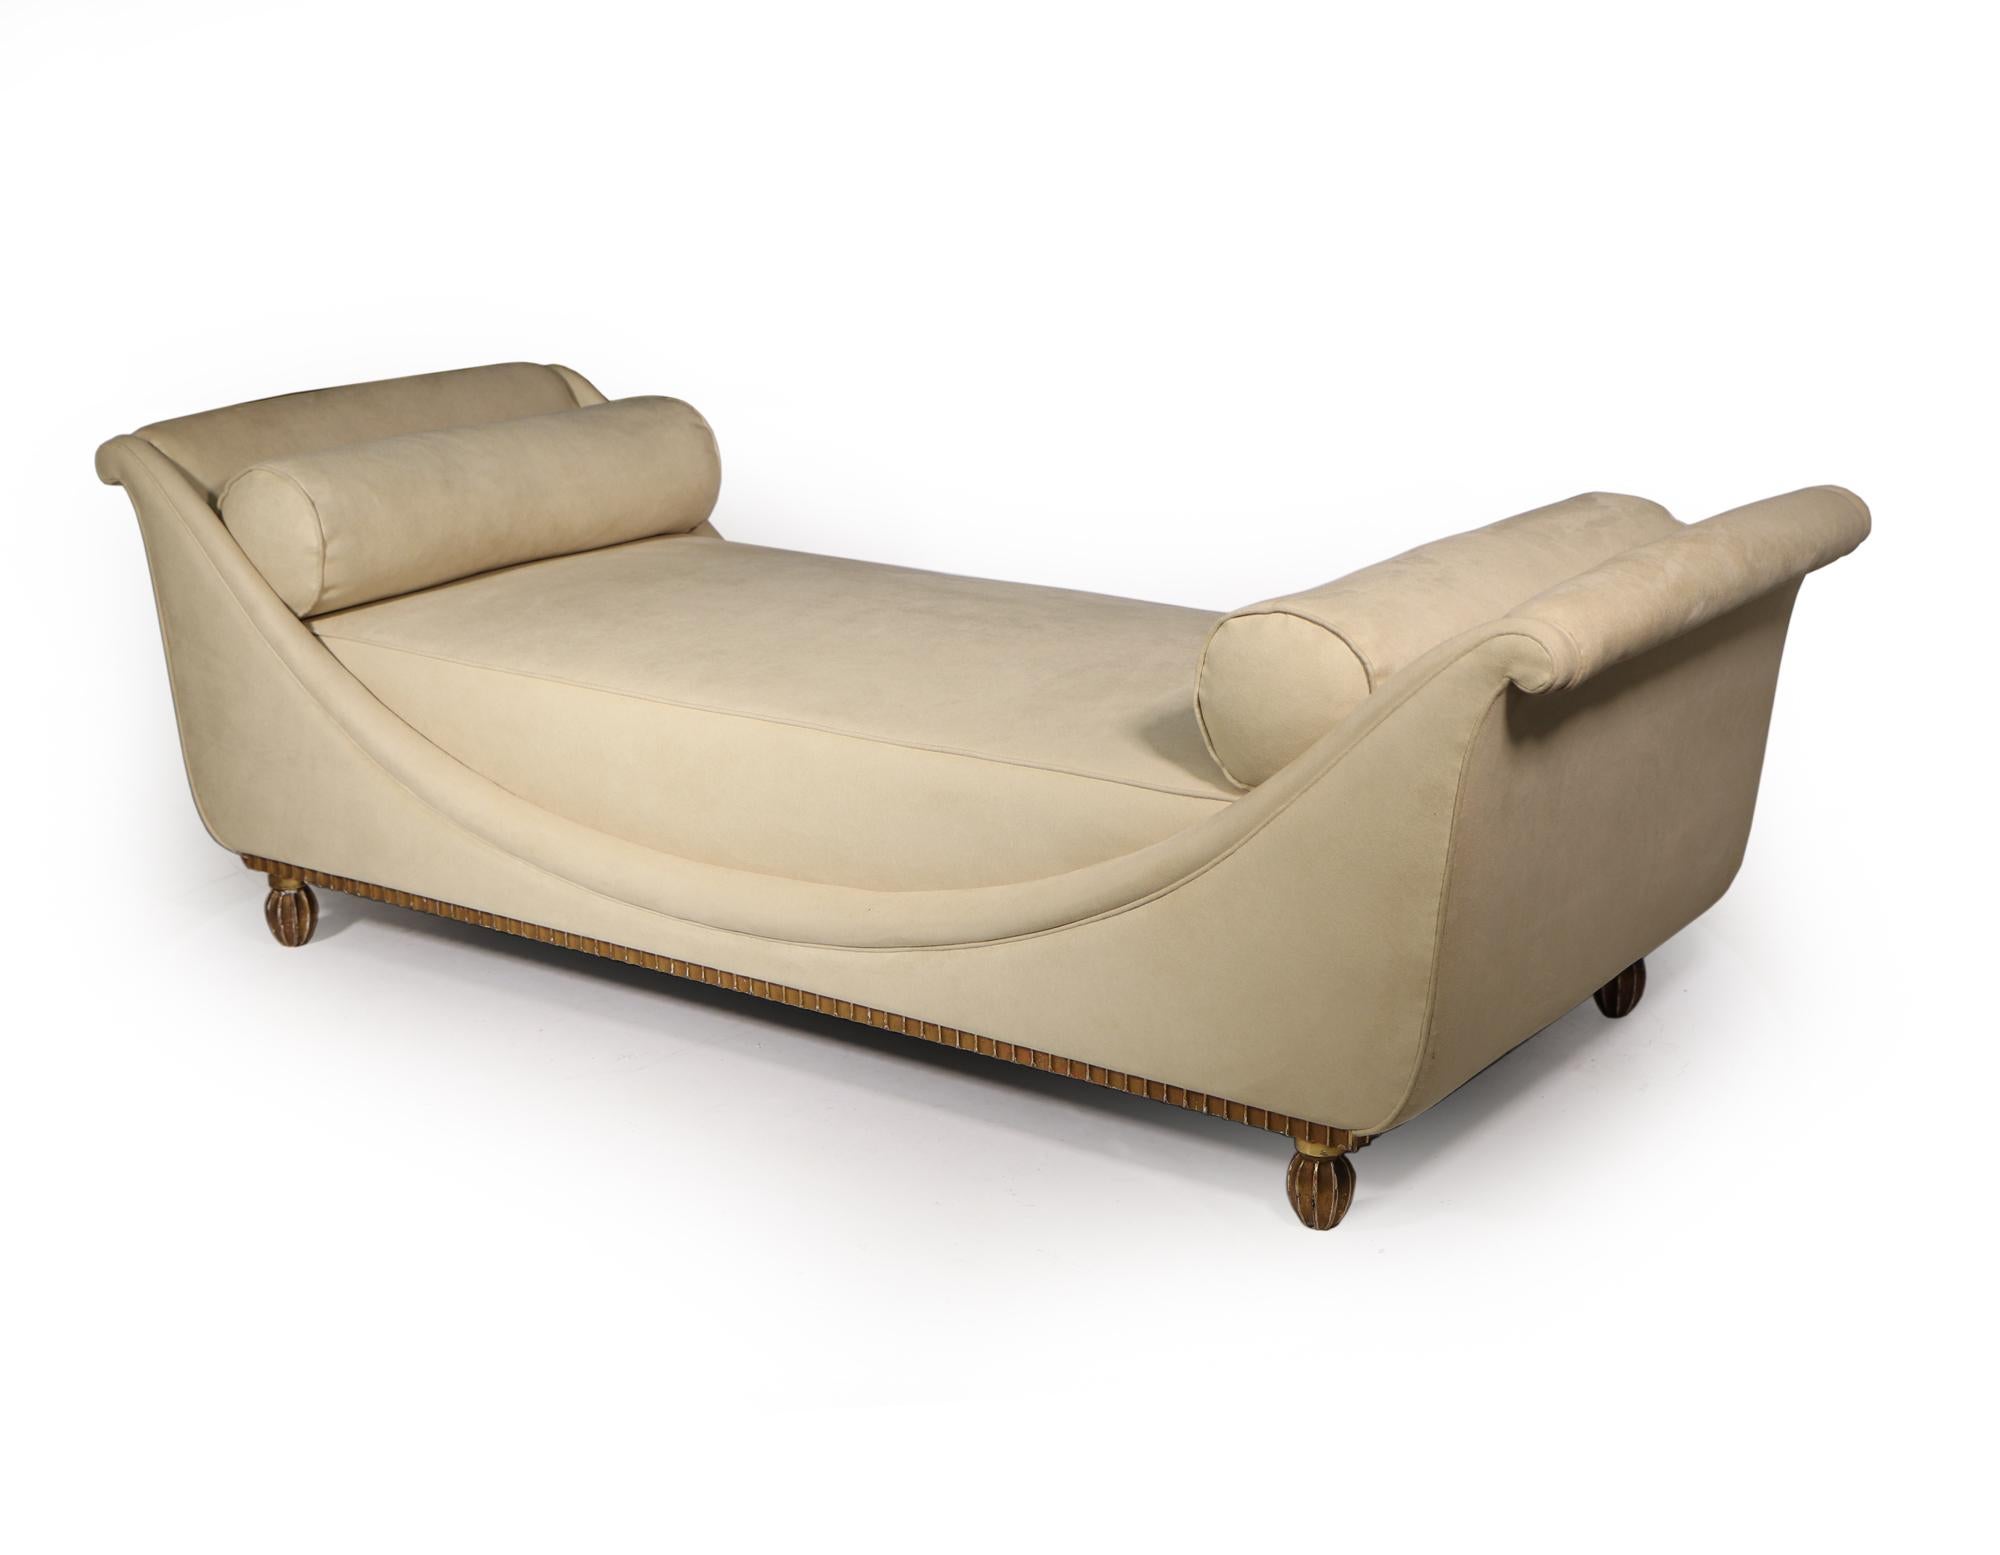 Early 20th Century French Art Deco Daybed by Andre Arbus